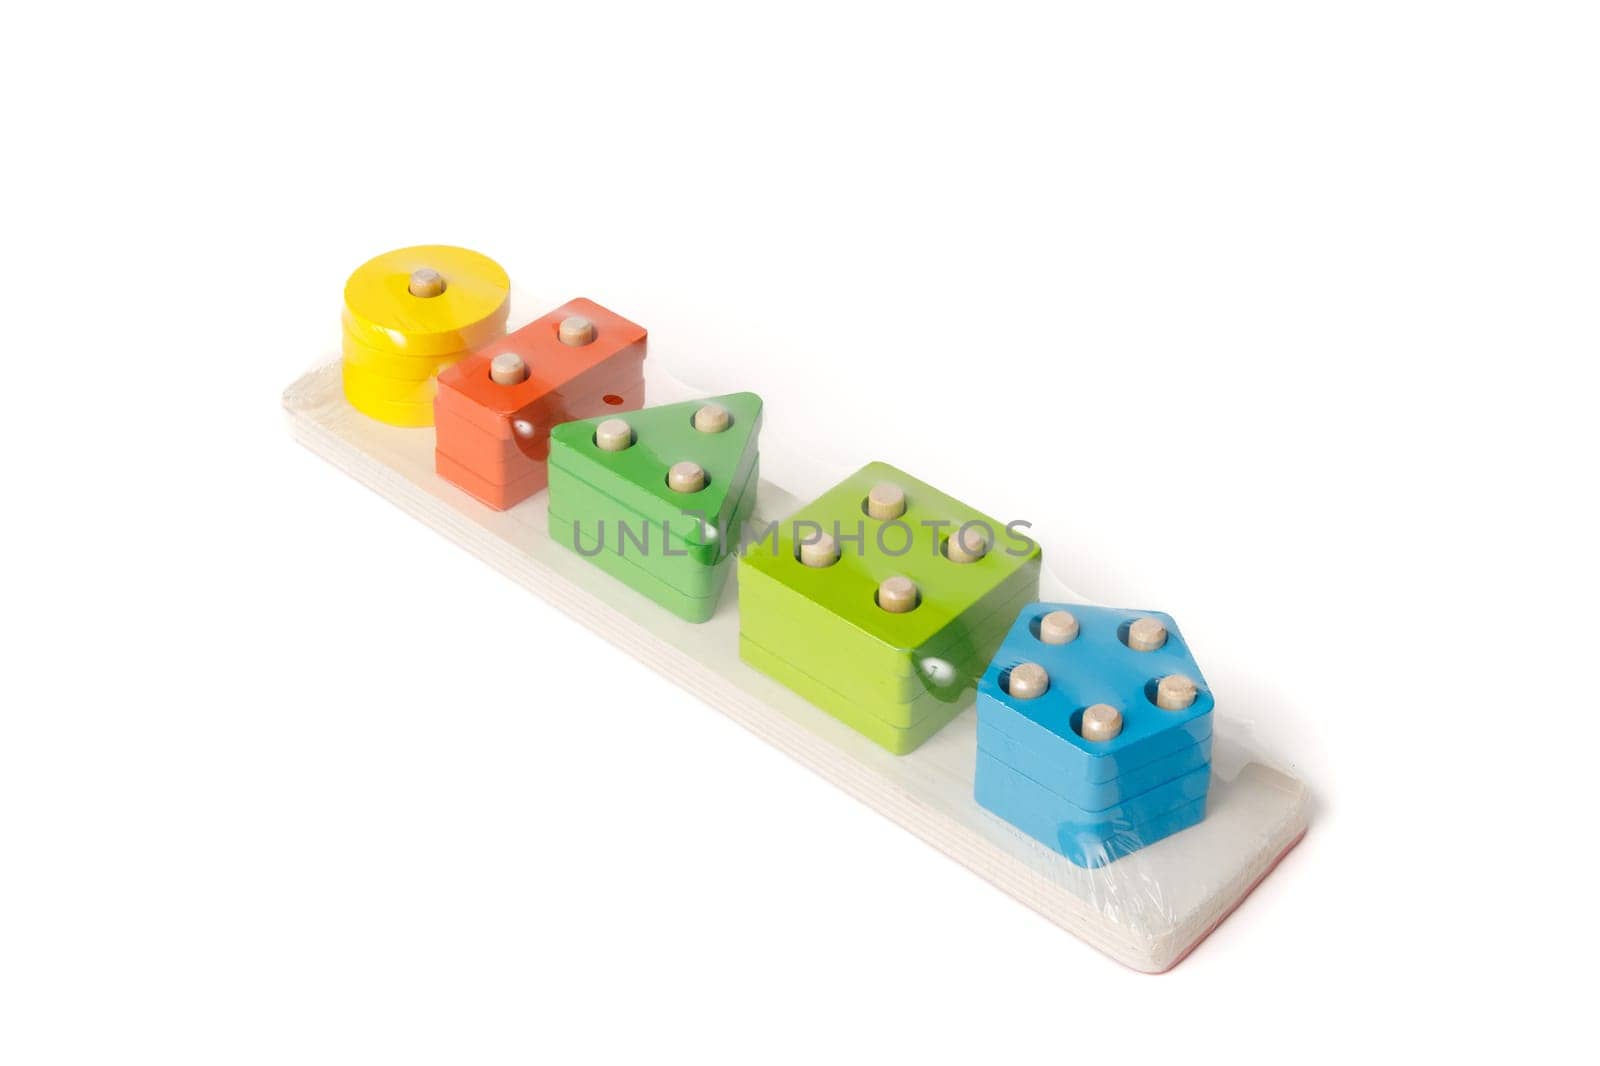 New children's wooden educational toy packed in polyethylene on a white background.